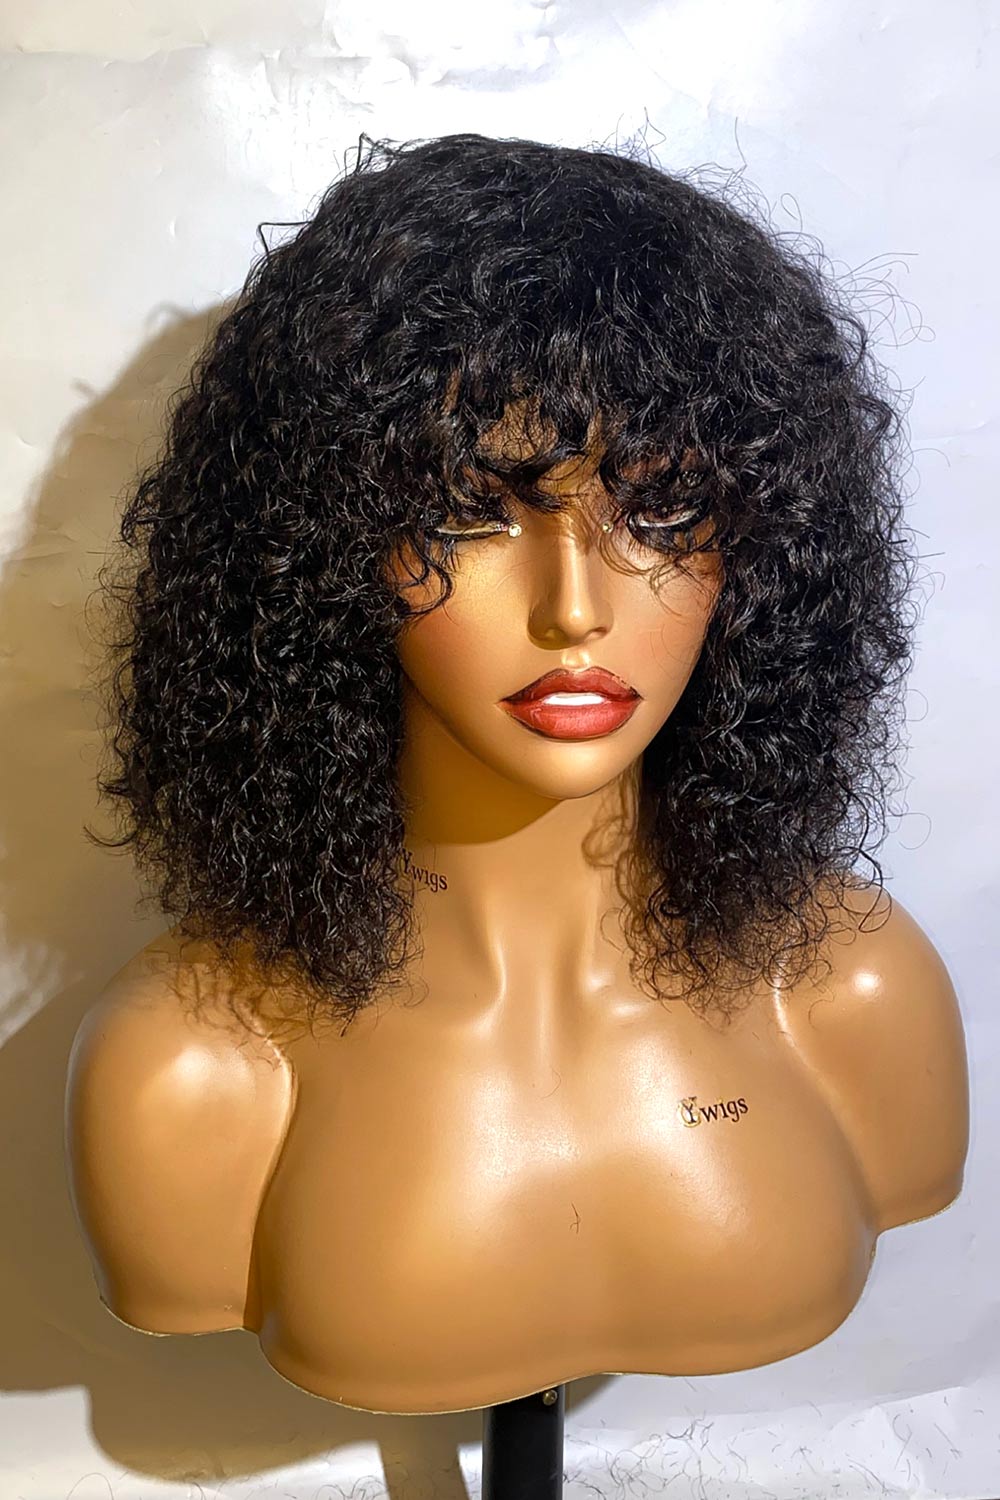 Designer Wigs-Super Easy Curly Wig With Bangs 12‘’